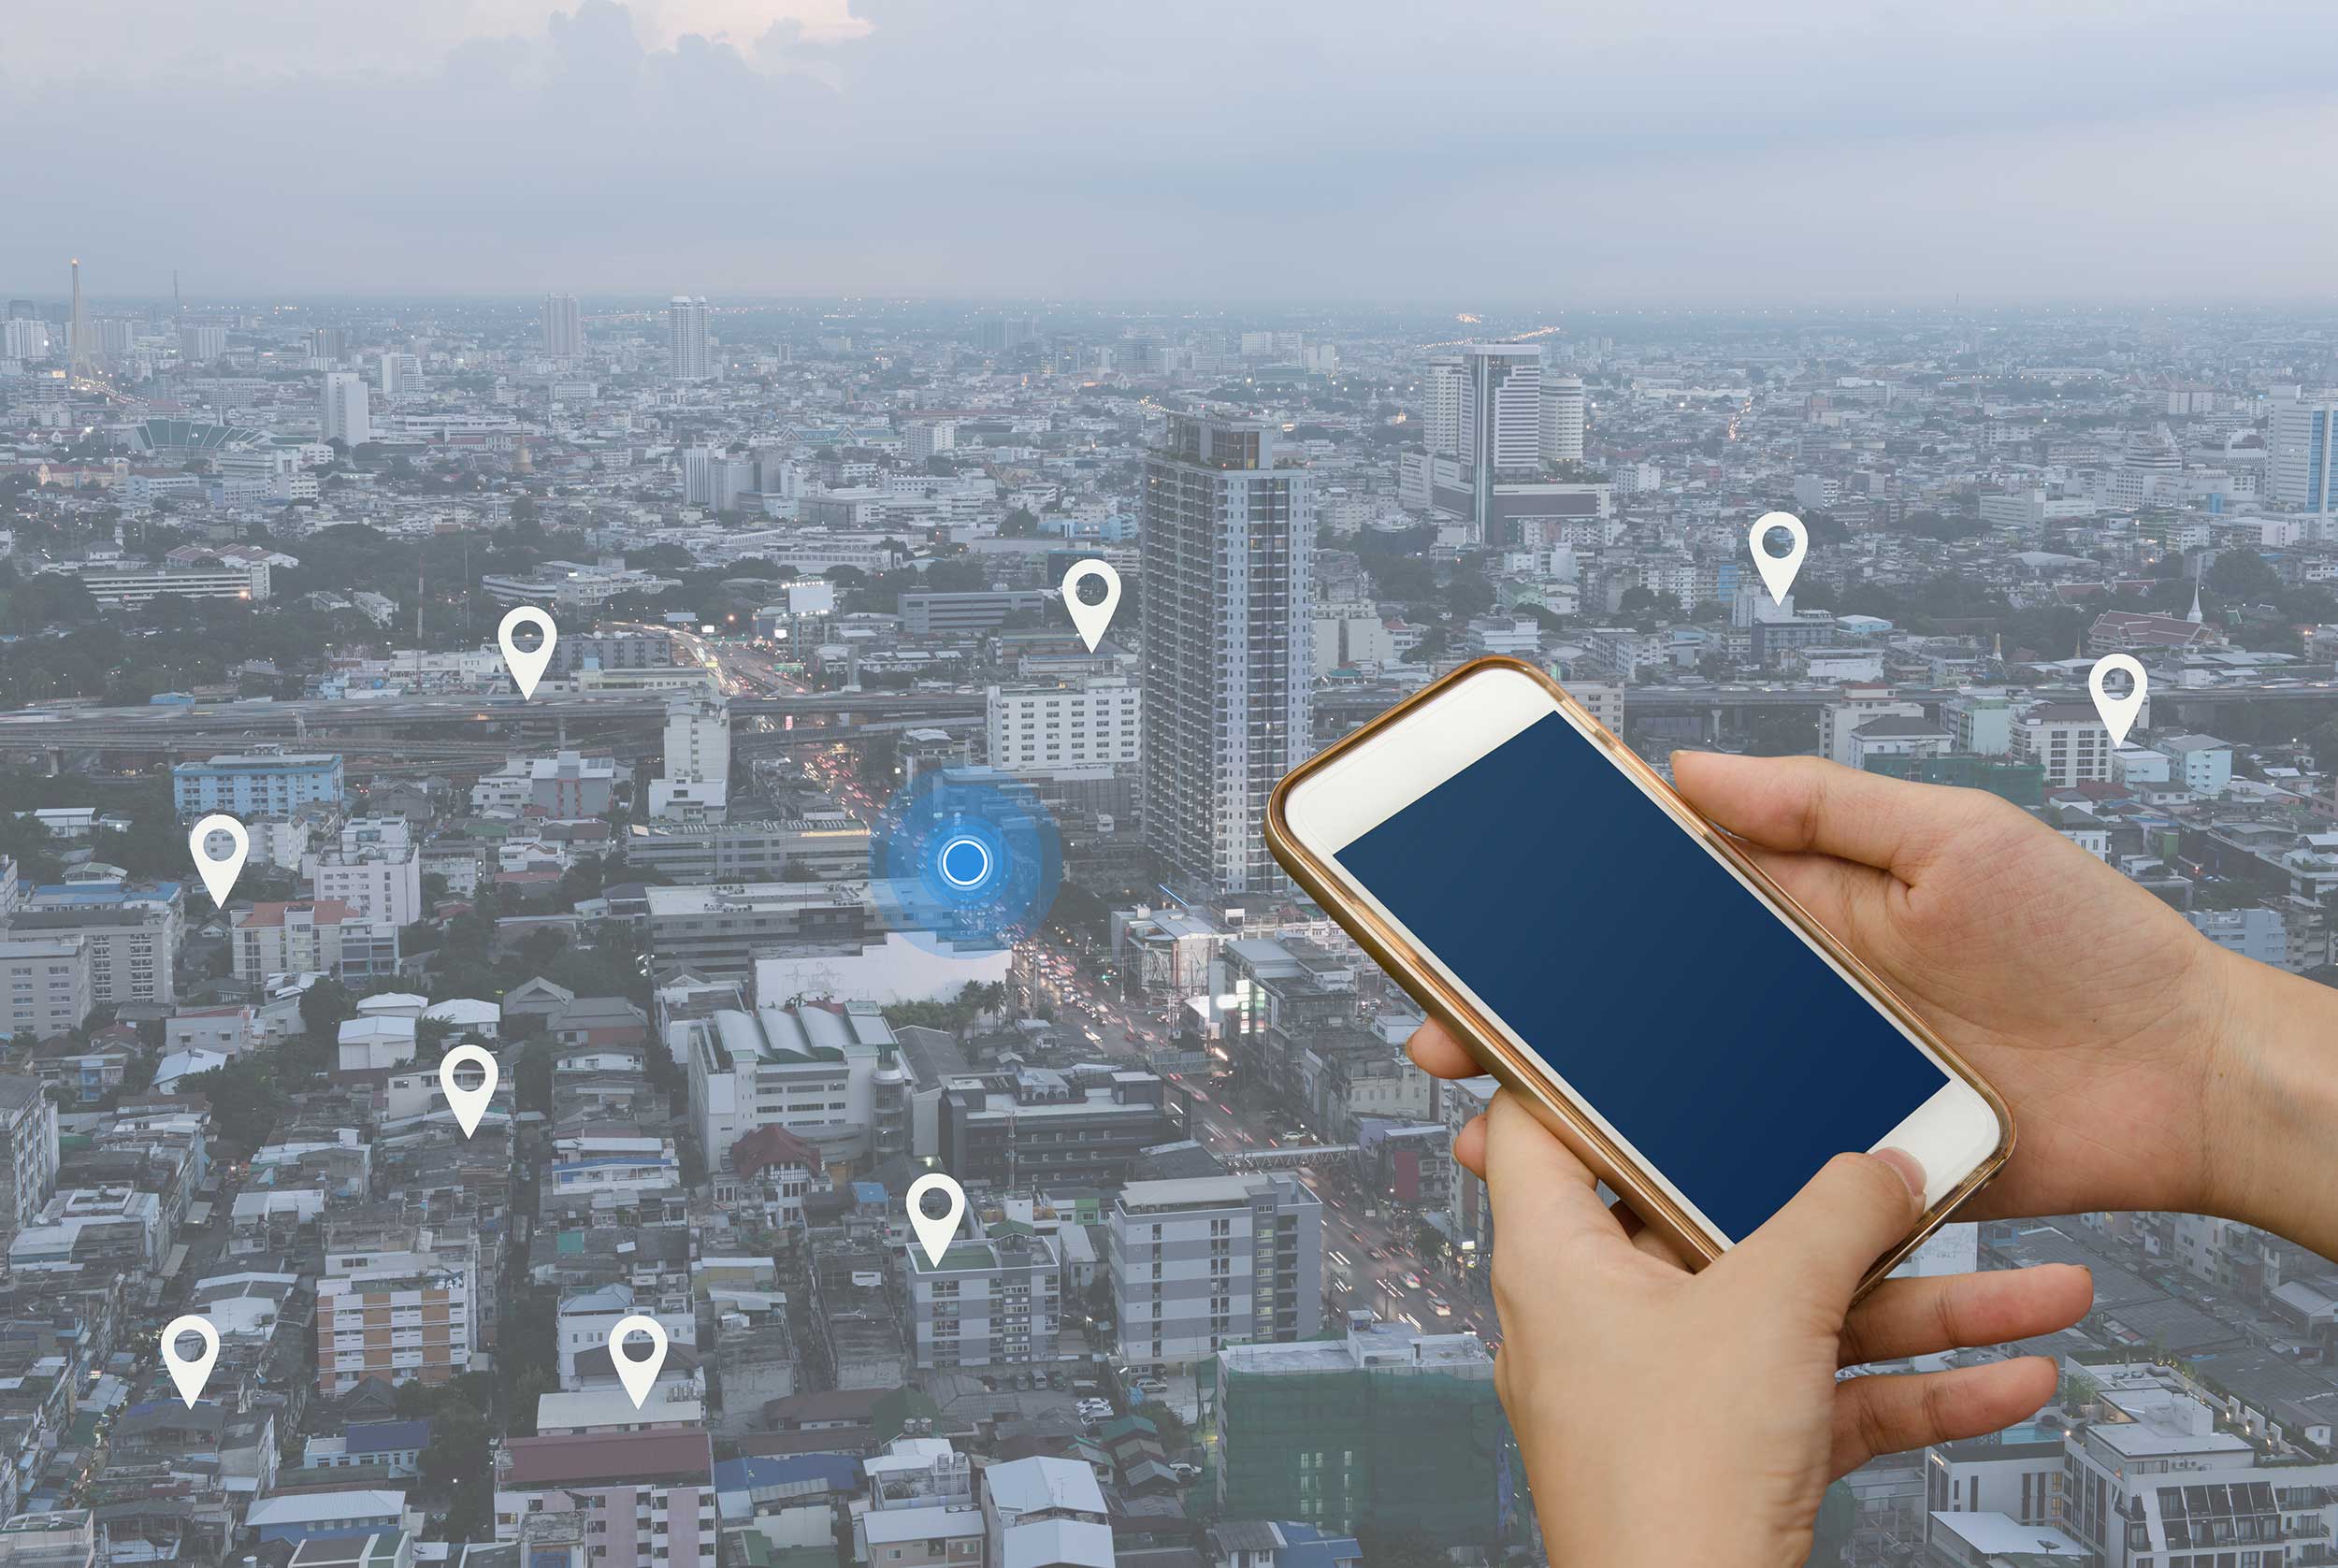 Stylized stock image of a person holding a cell phone against a cityscape that is sprinkled with map pinpoints